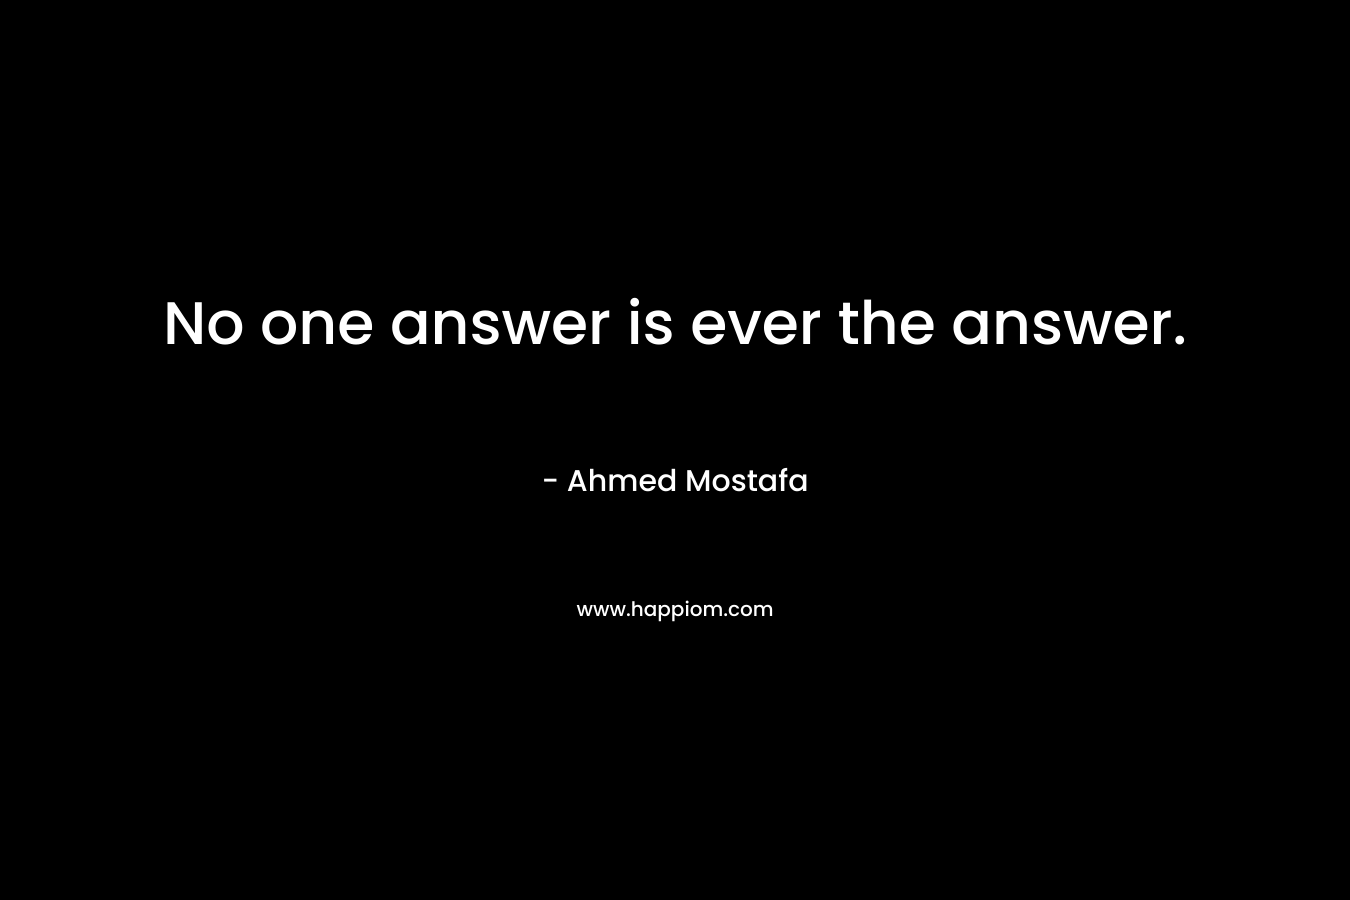 No one answer is ever the answer.